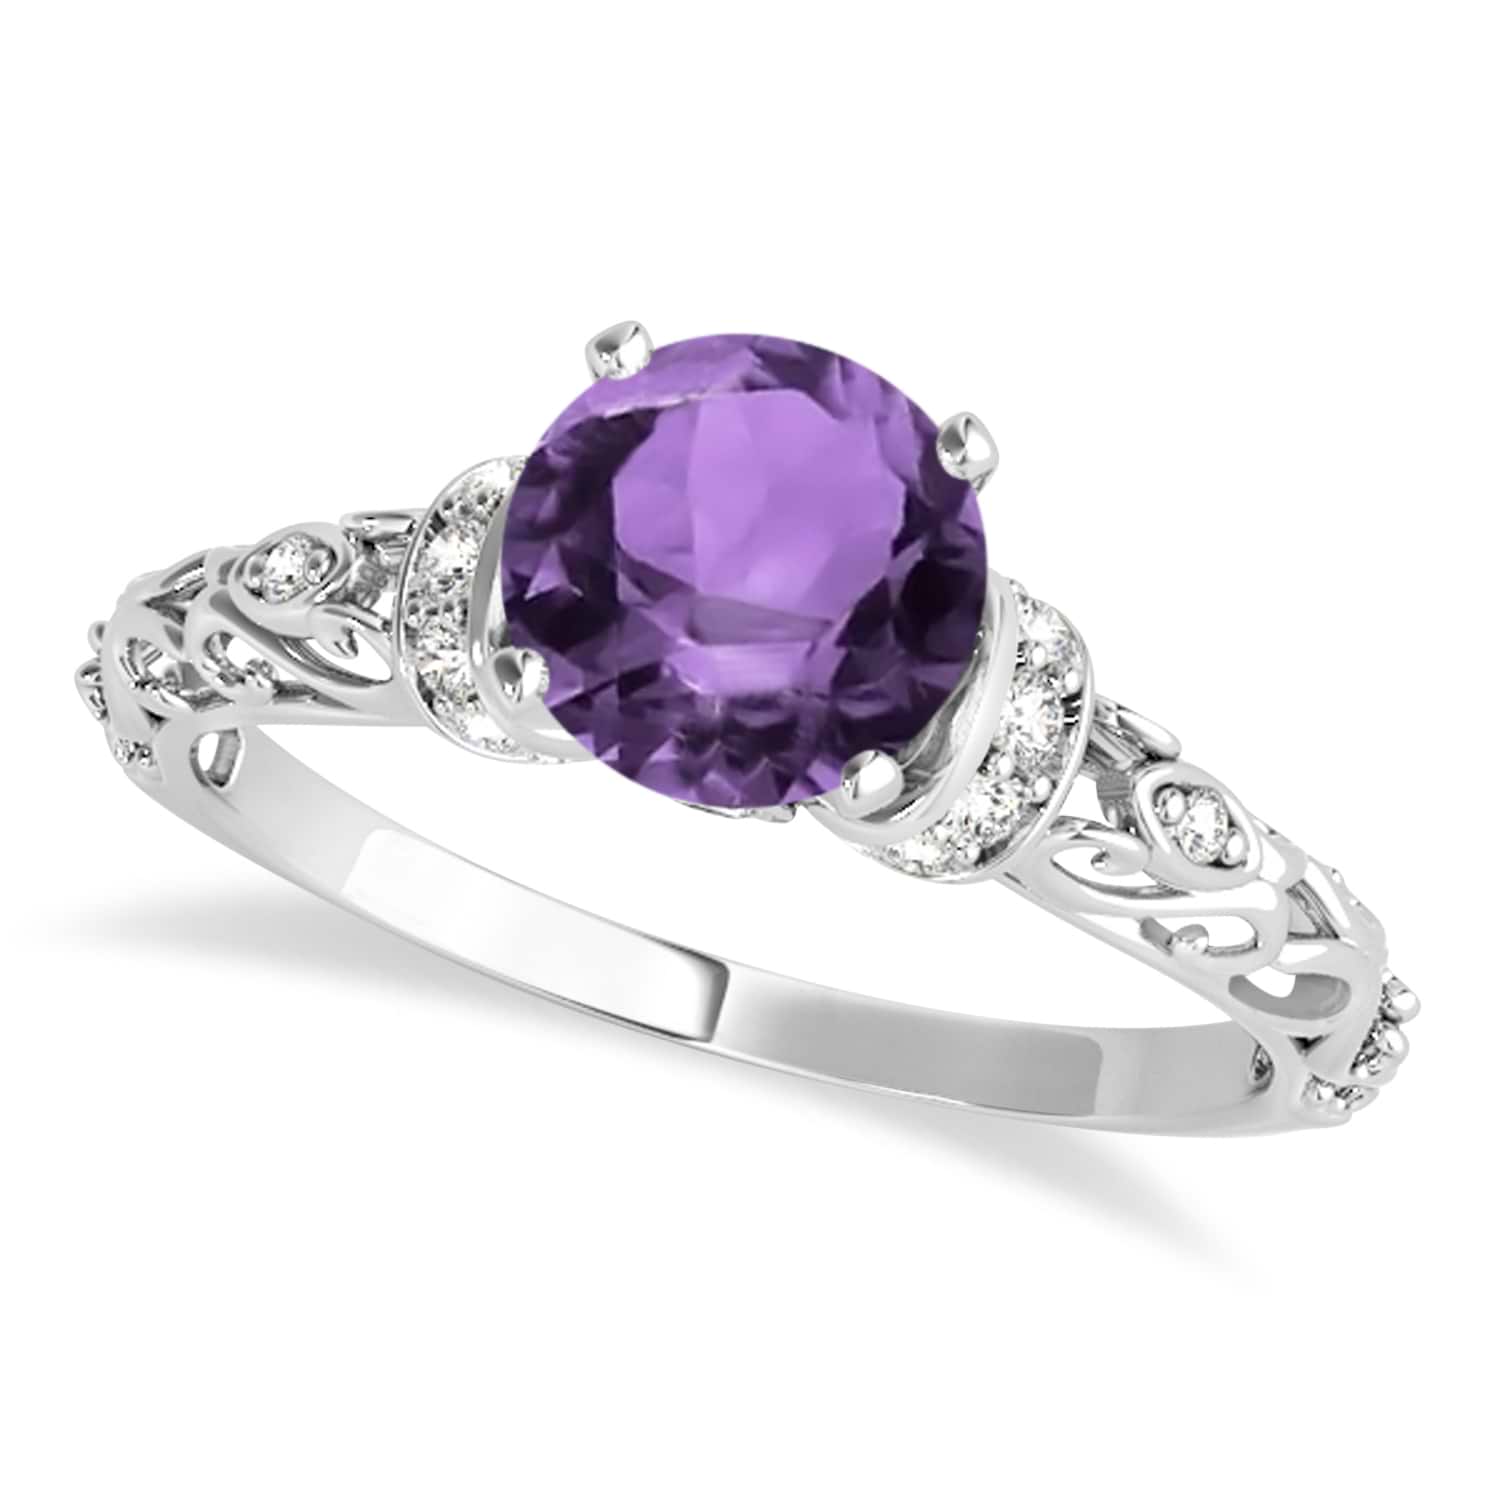 Amethyst & Diamond Antique Style Engagement Ring 14k White Gold (1.62ct)